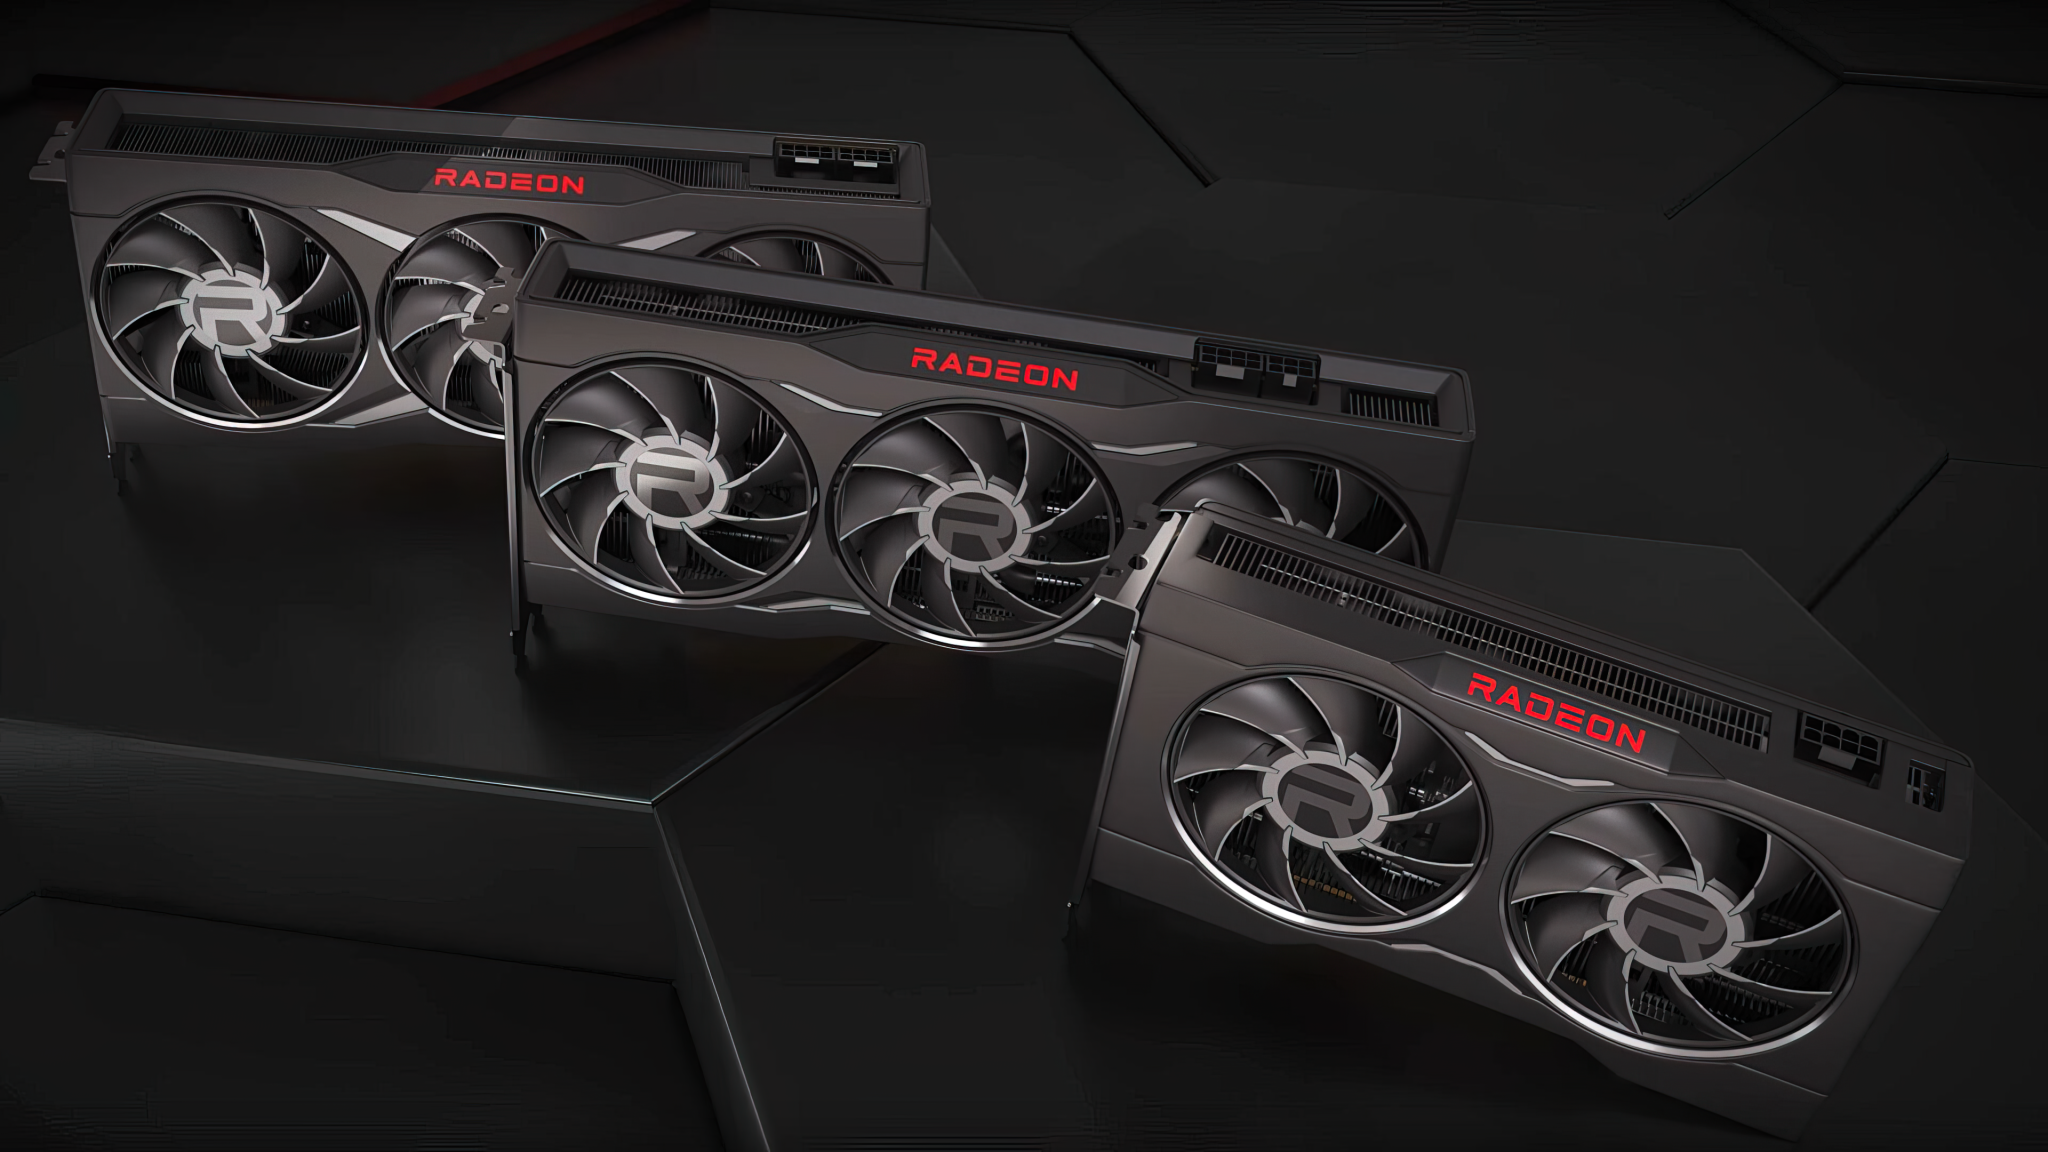 Amd Radeon Rx Xt Rdna Graphics Card Official Navi Gpu Hot Sex Picture Hot Sex Picture